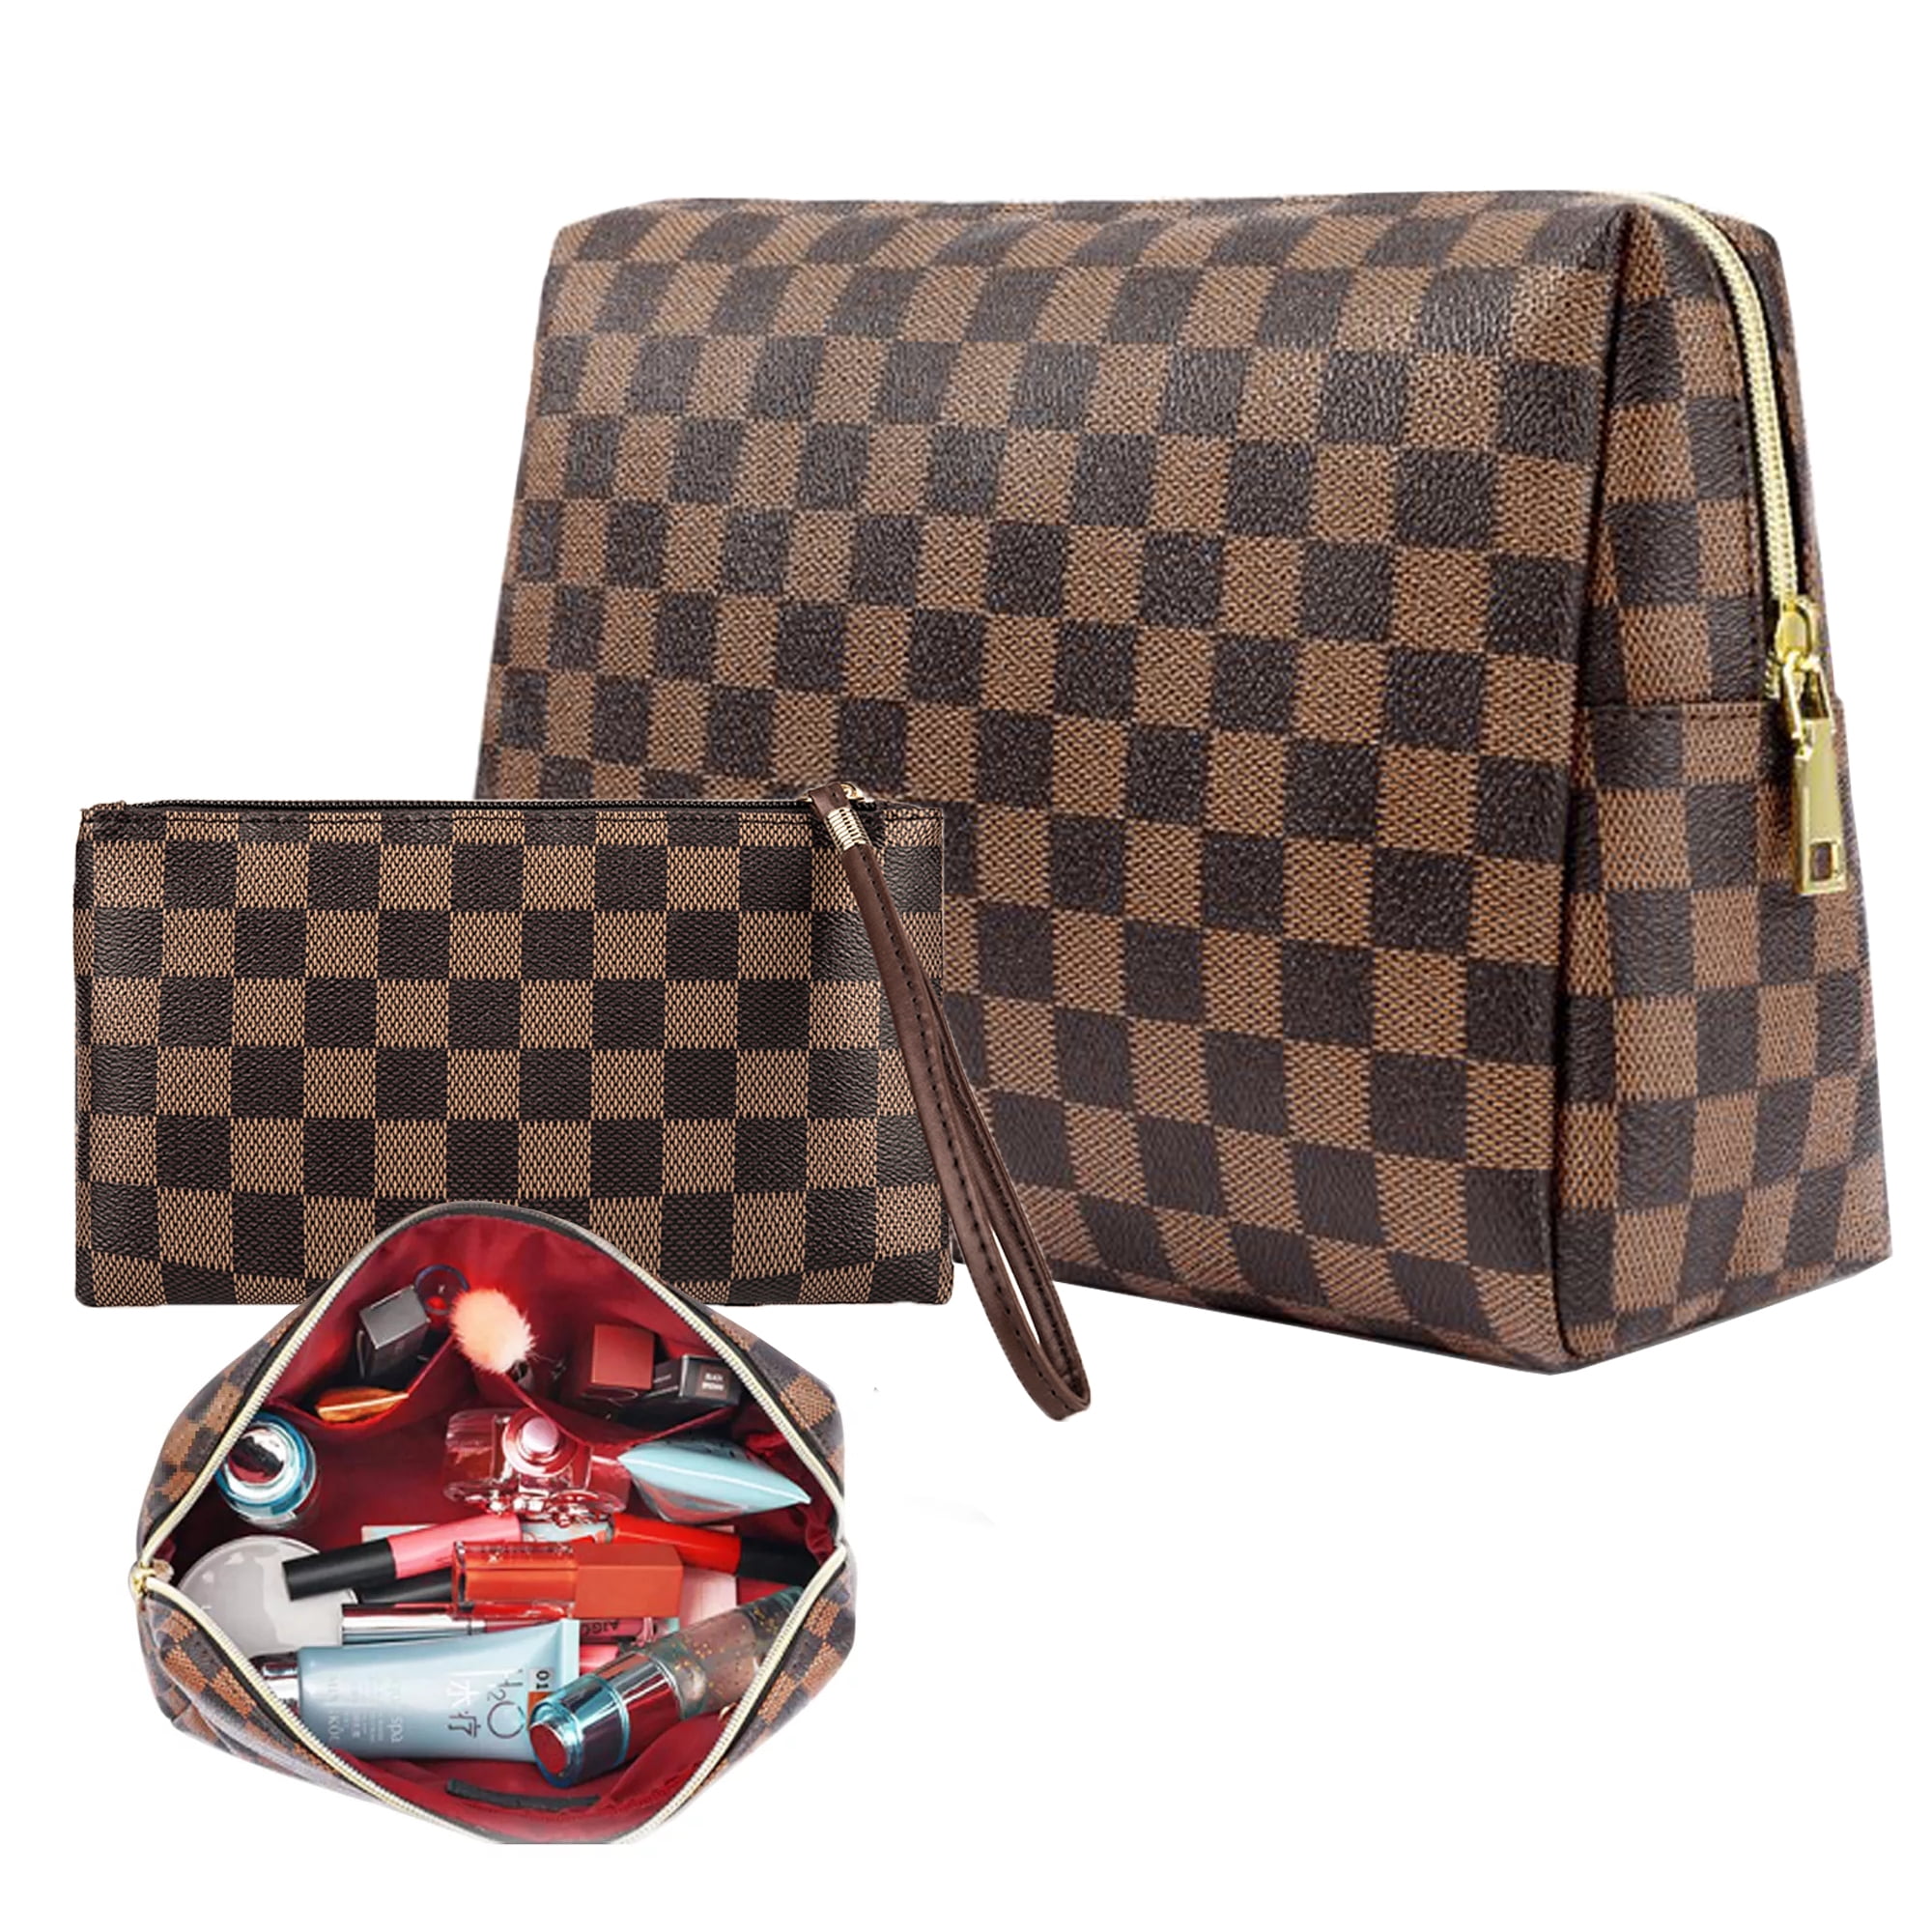 WHAT'S IN MY TRAVEL MAKEUP BAG  Louis Vuitton DAMIER EBENE DUPE 